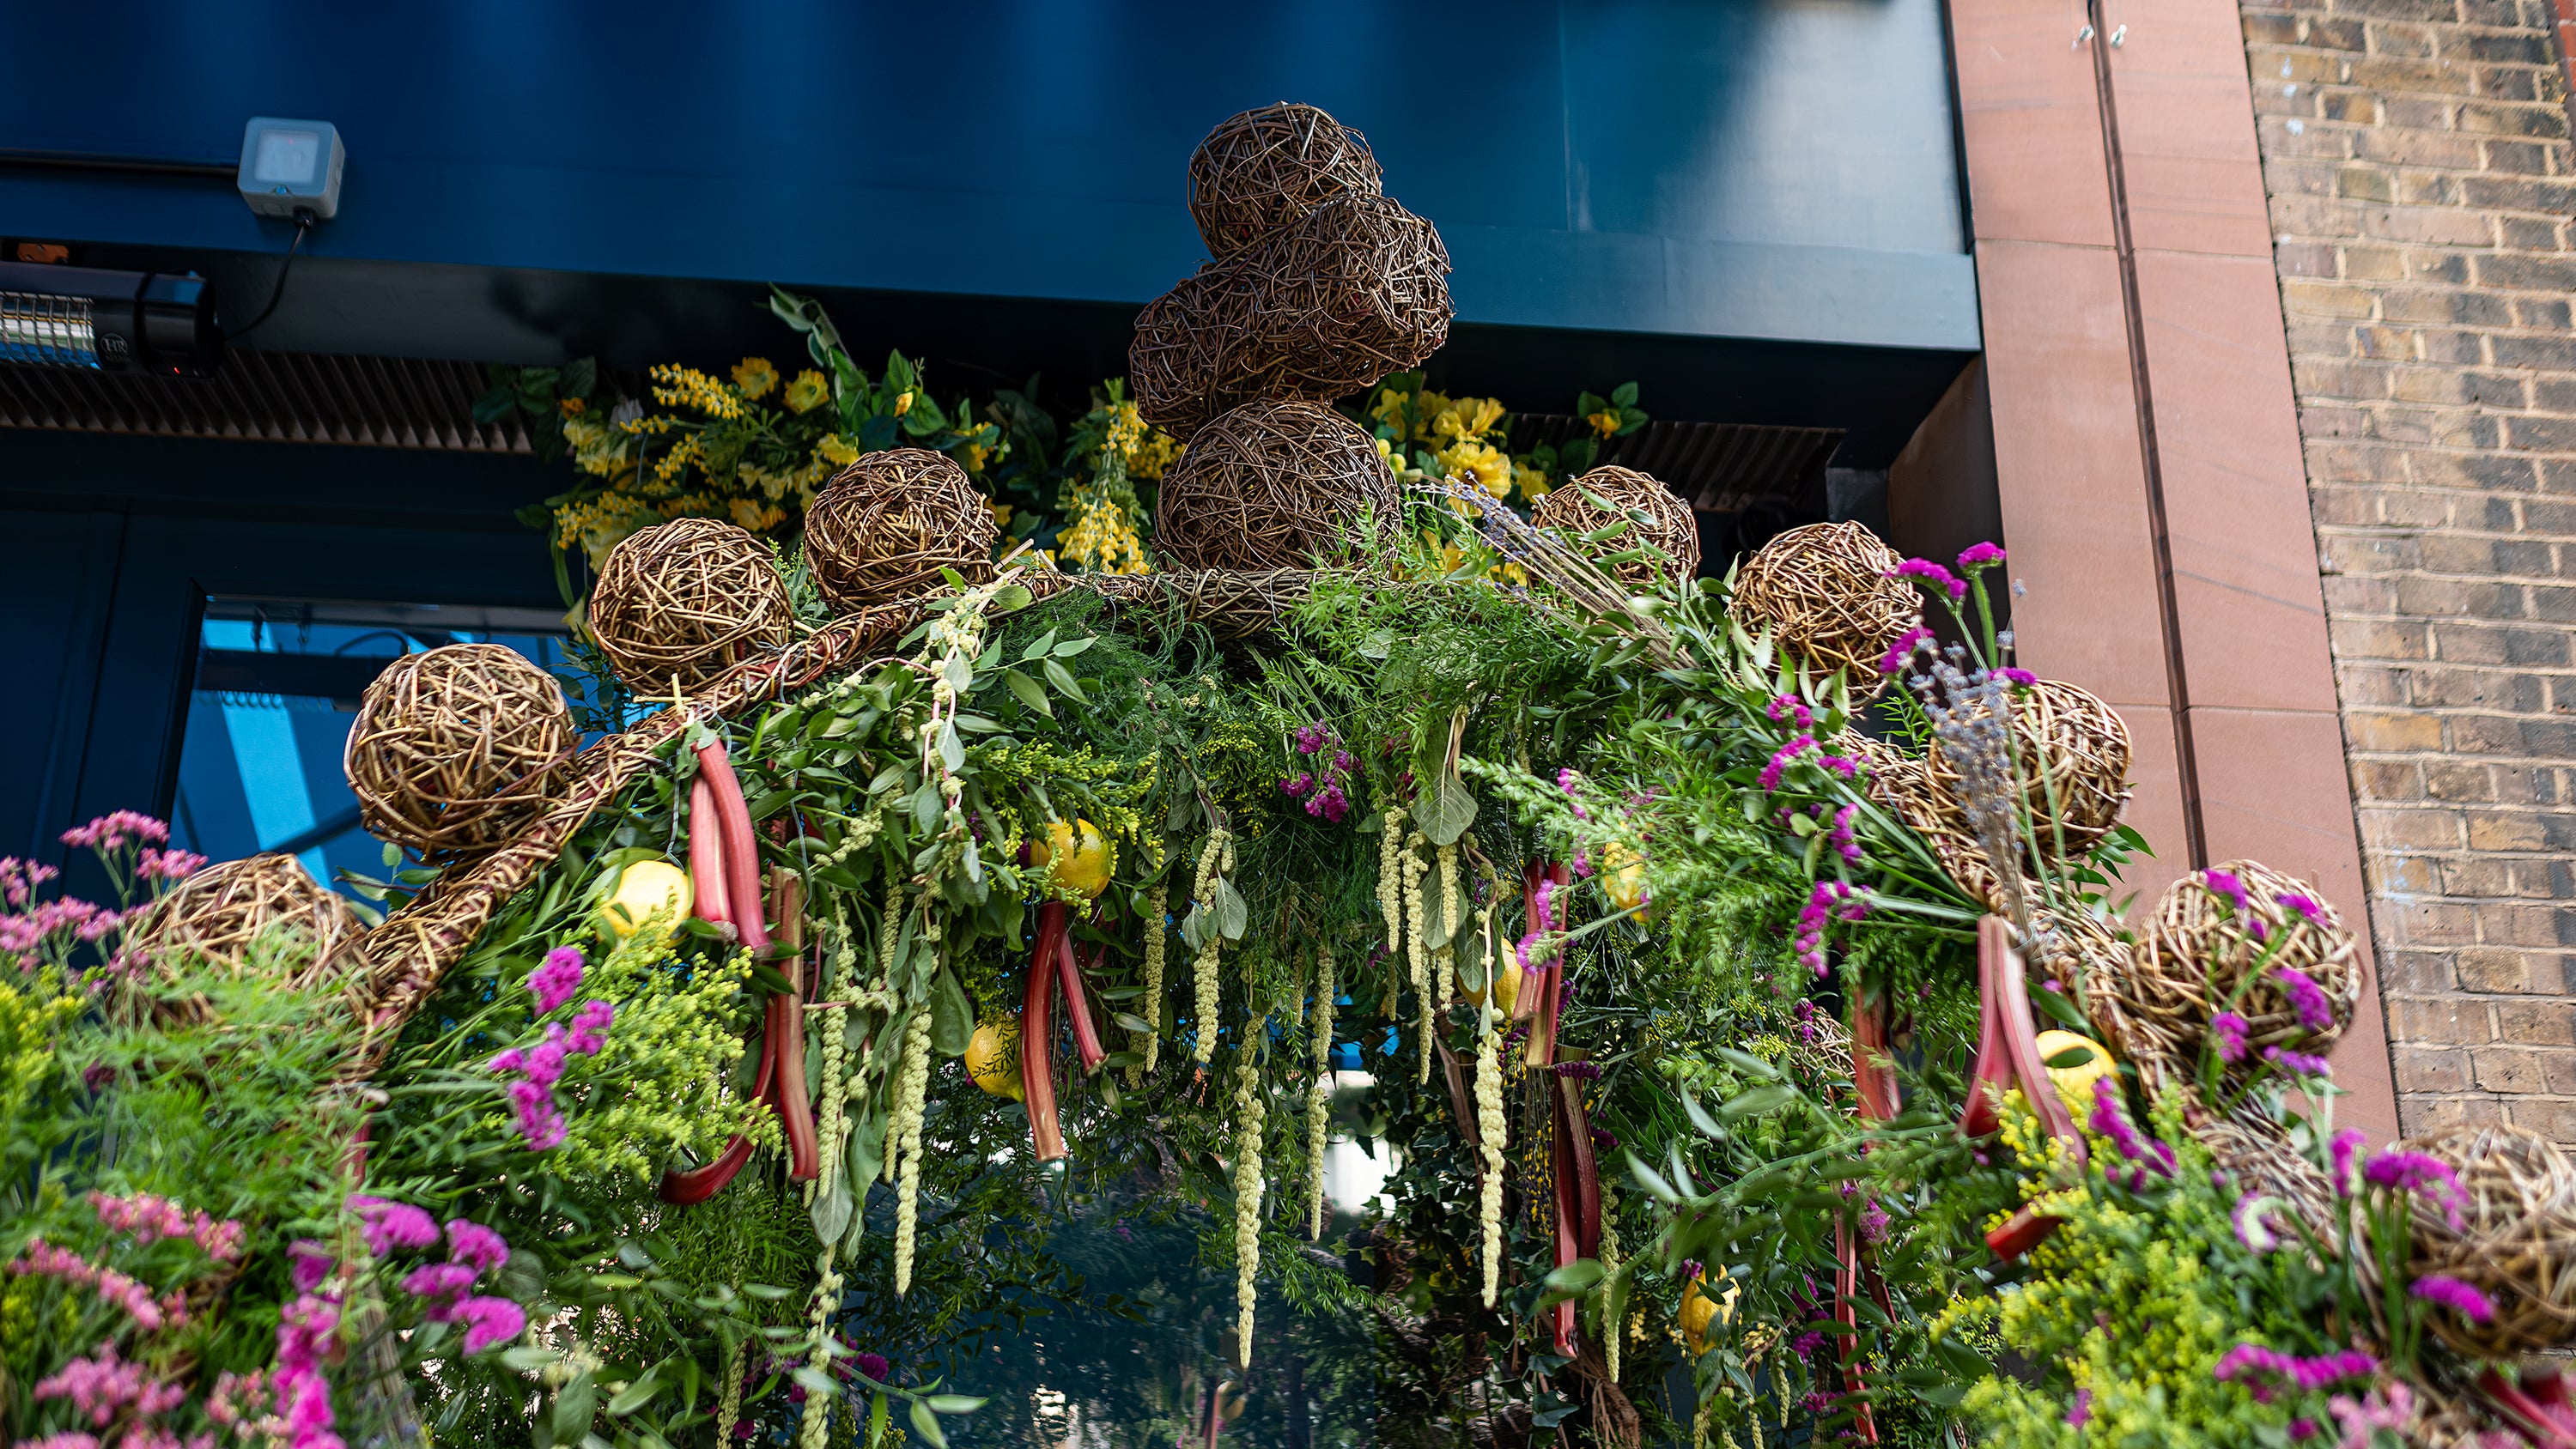 Elegant floral arch designed by Amaranté London for Chelsea in Bloom, decorated with wicker balls, lemons, and a variety of green, yellow, and pink flowers.